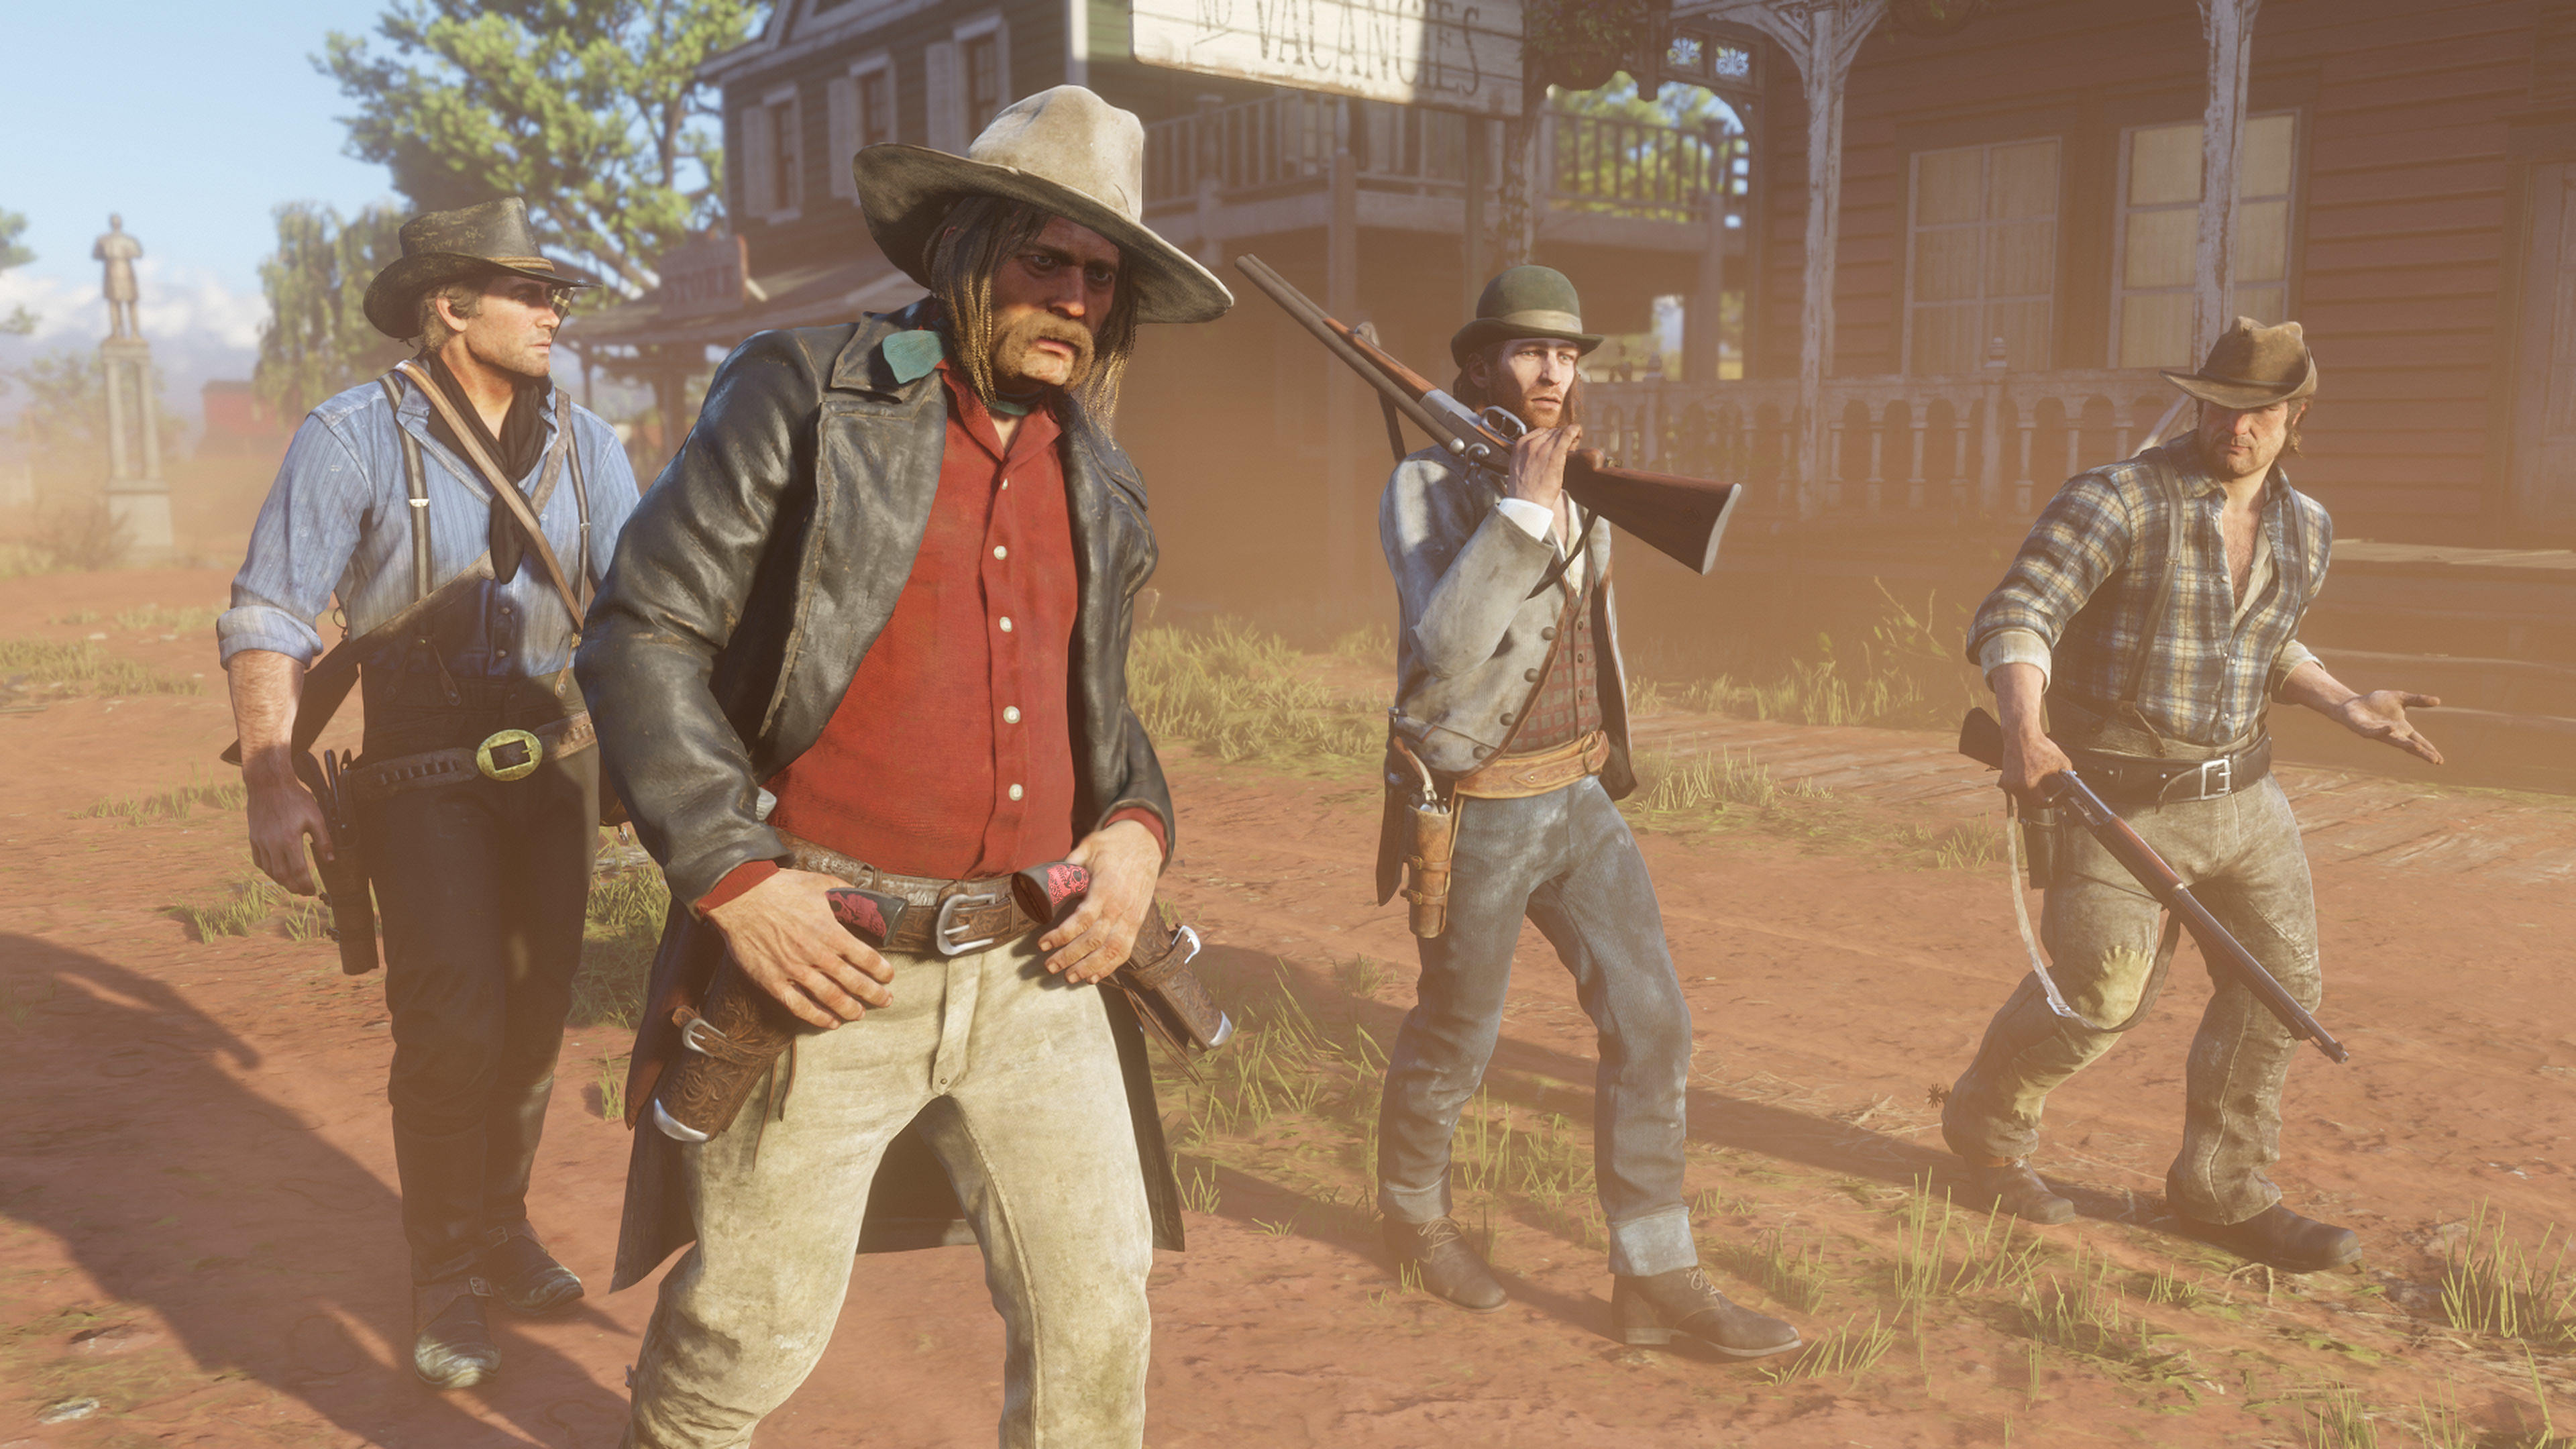 General 3840x2160 Red Dead Redemption Rockstar Games Red Dead Redemption 2 video games Arthur Morgan Micah Bell Sean MacGuire outlaws  Rhodes (town) video game characters men Bill Williamson